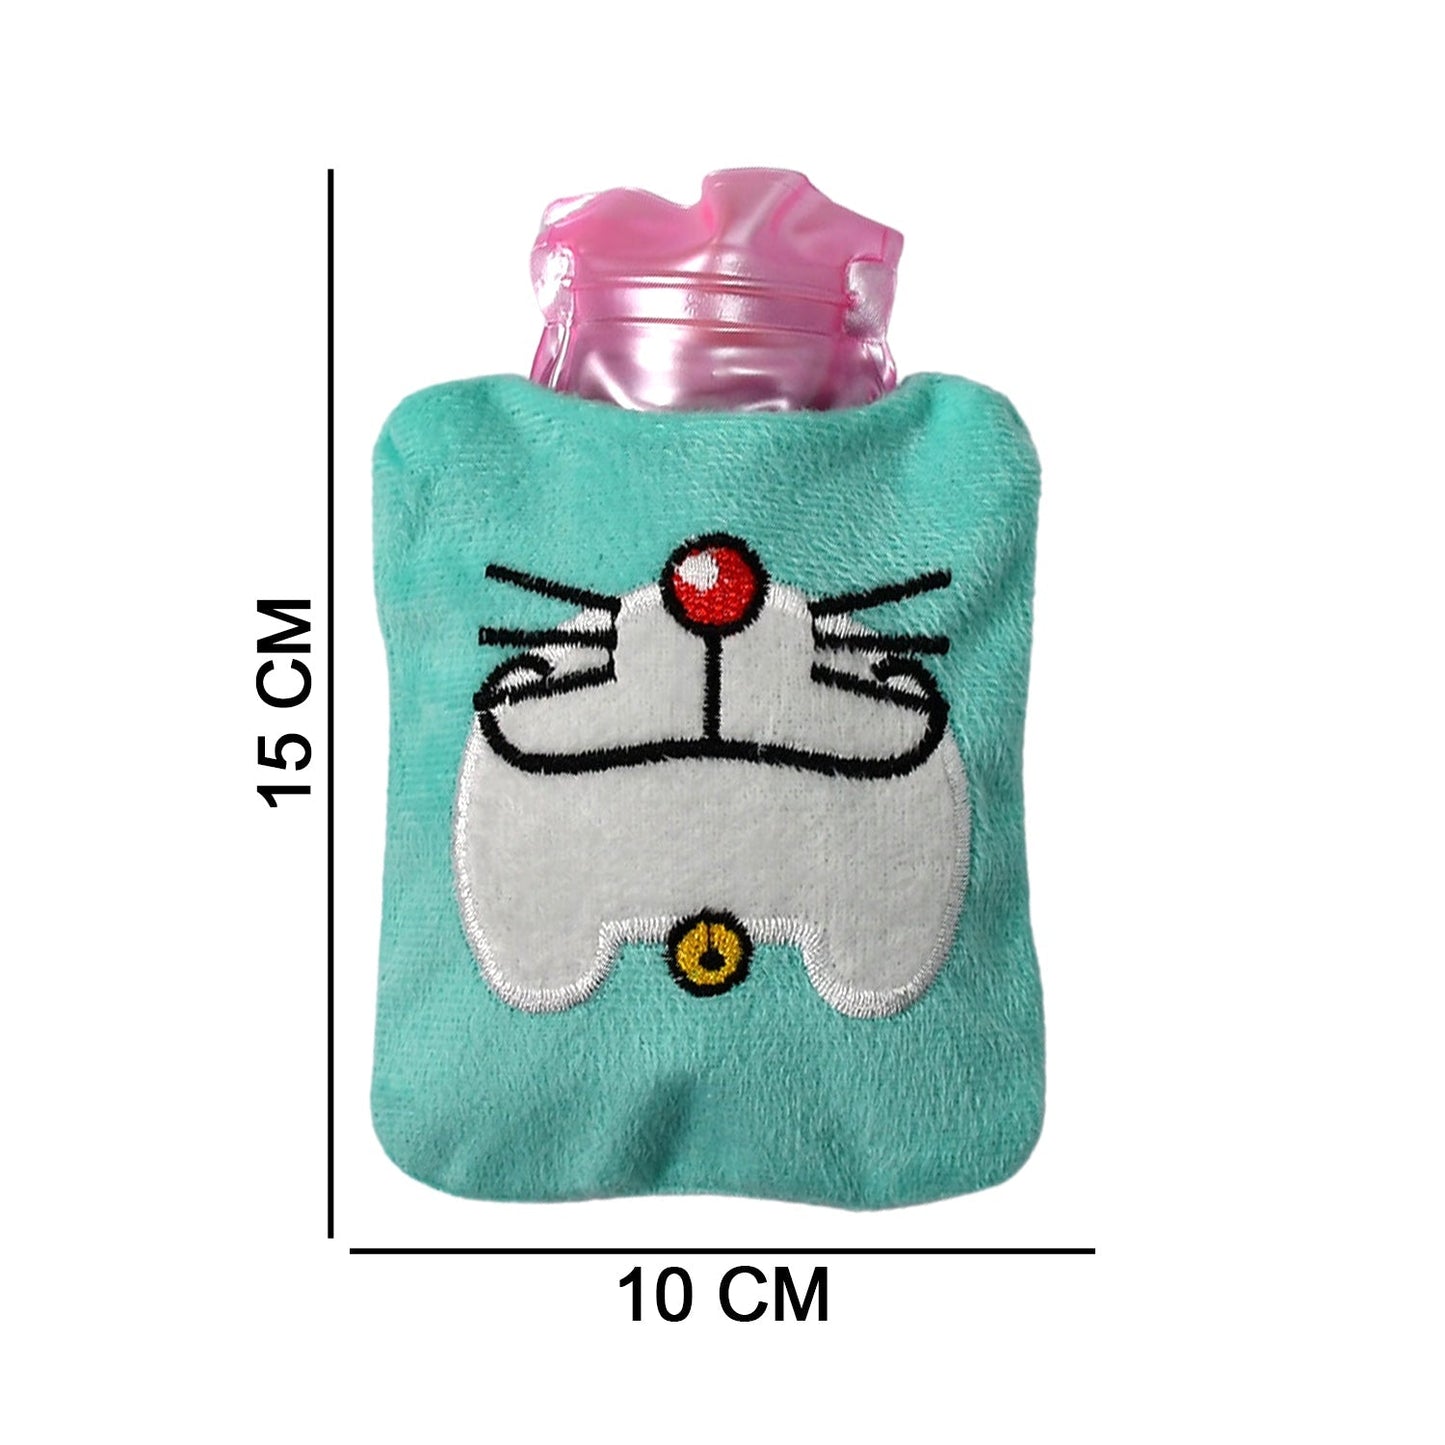 6529 Doremon Cartoon small Hot Water Bag with Cover for Pain Relief, Neck, Shoulder Pain and Hand, Feet Warmer, Menstrual Cramps. DeoDap